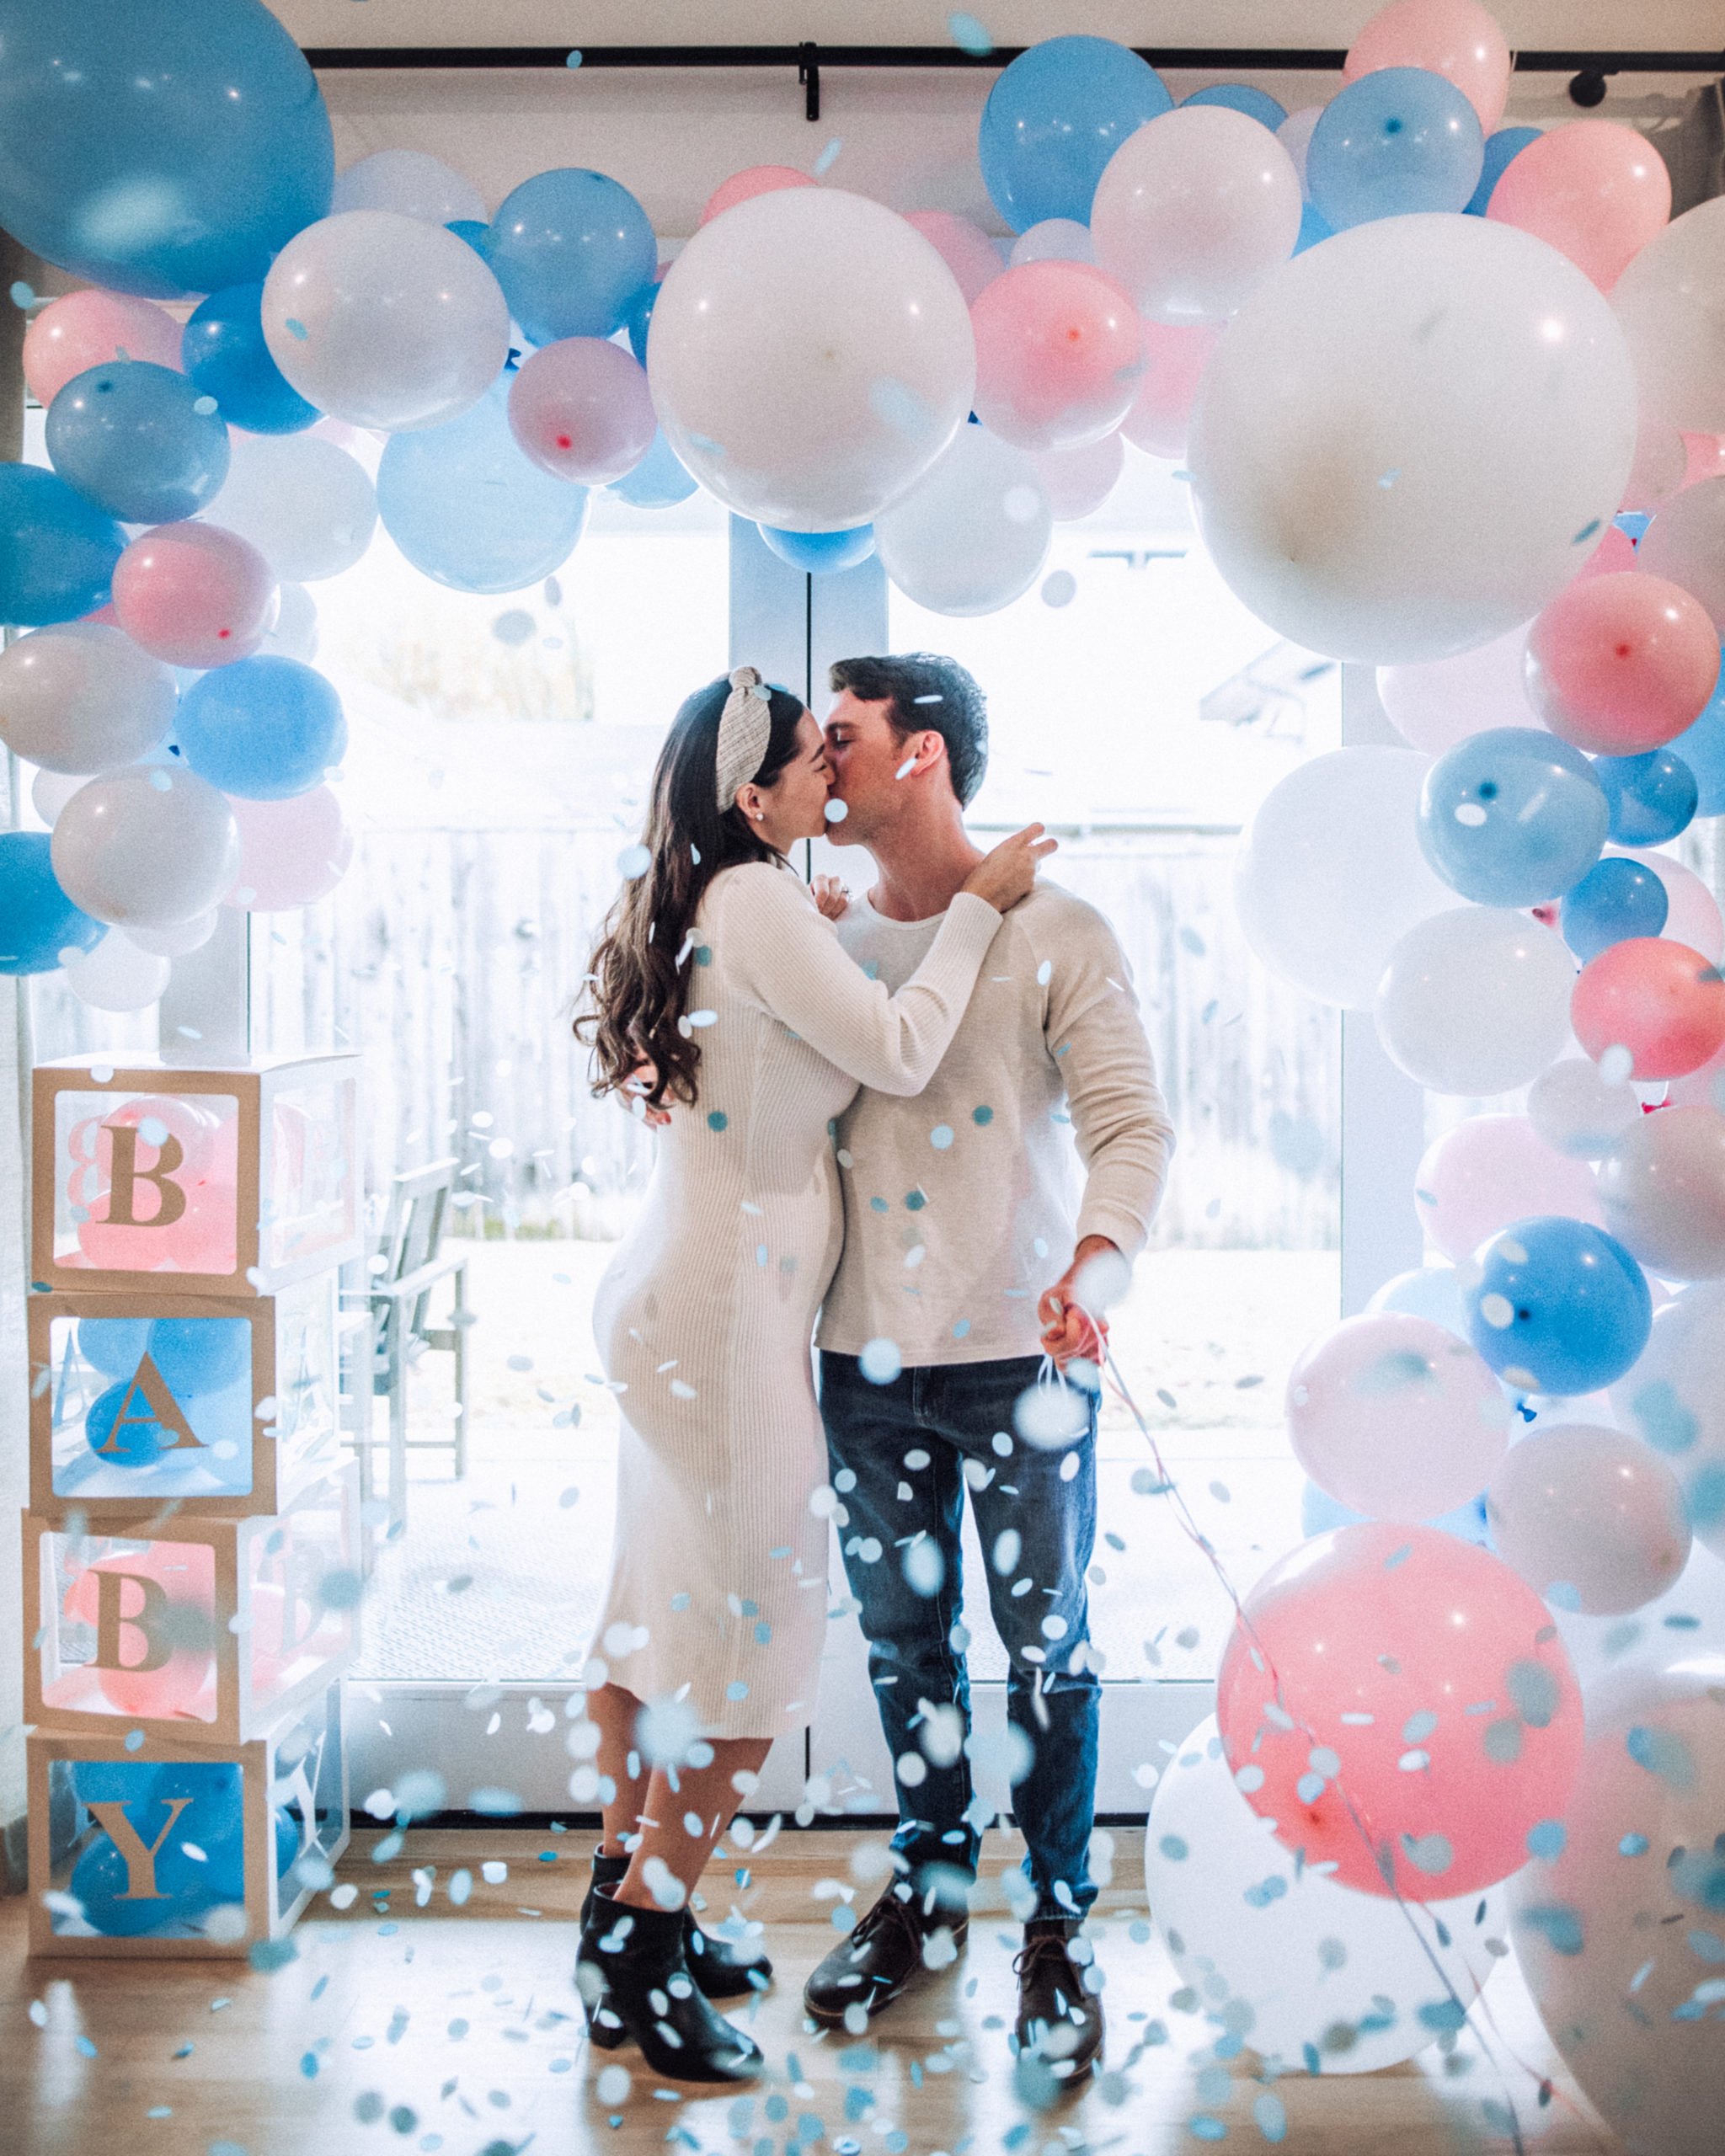 Contribuyente De acuerdo con Dibujar How to Create a Photo-Worthy Gender Reveal Party on a Budget